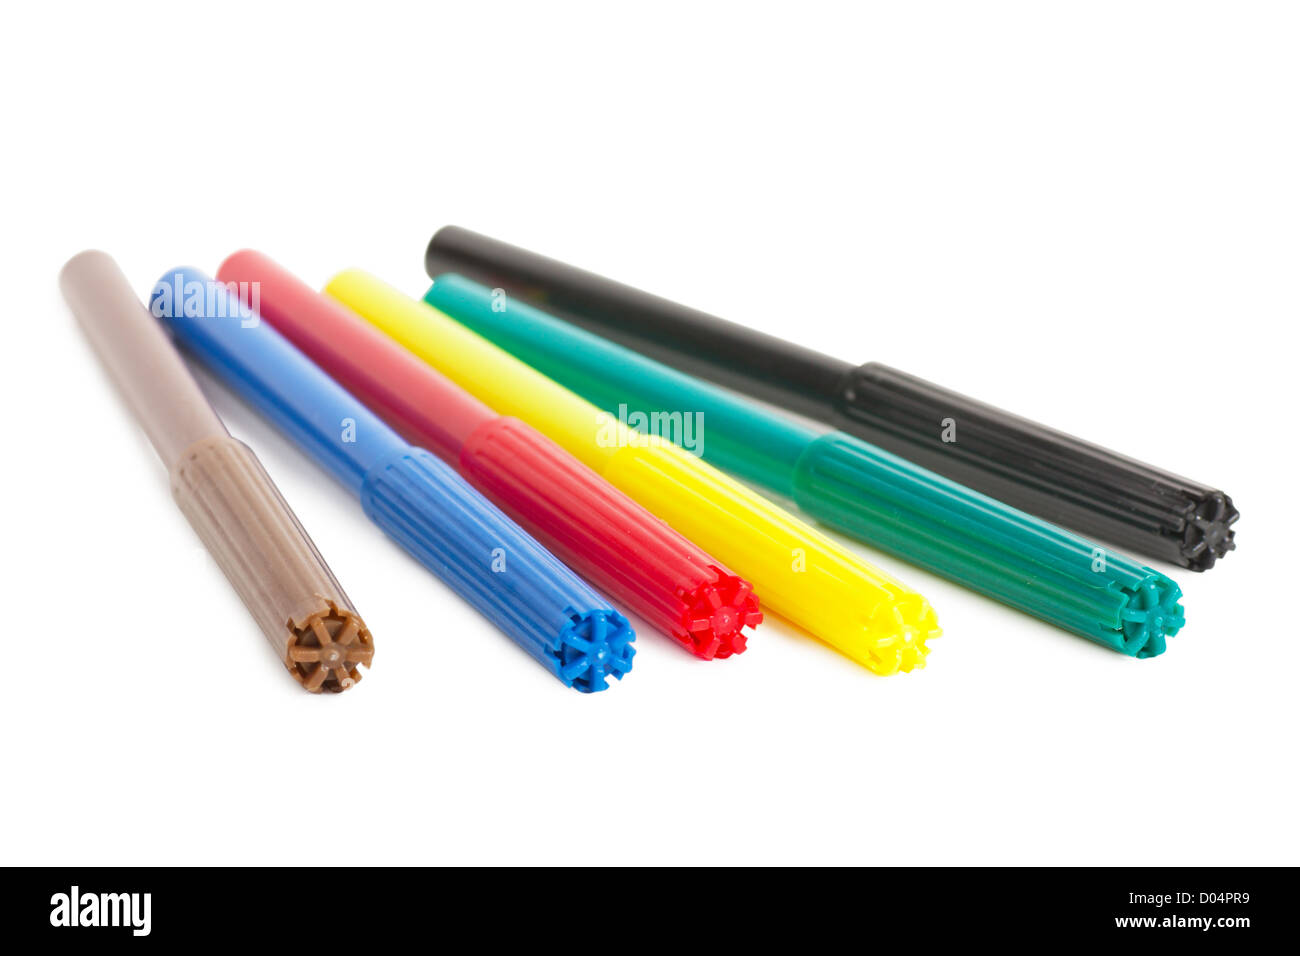 Six colorful markers (brown, blue, red, yellow, green and black) over white background Stock Photo